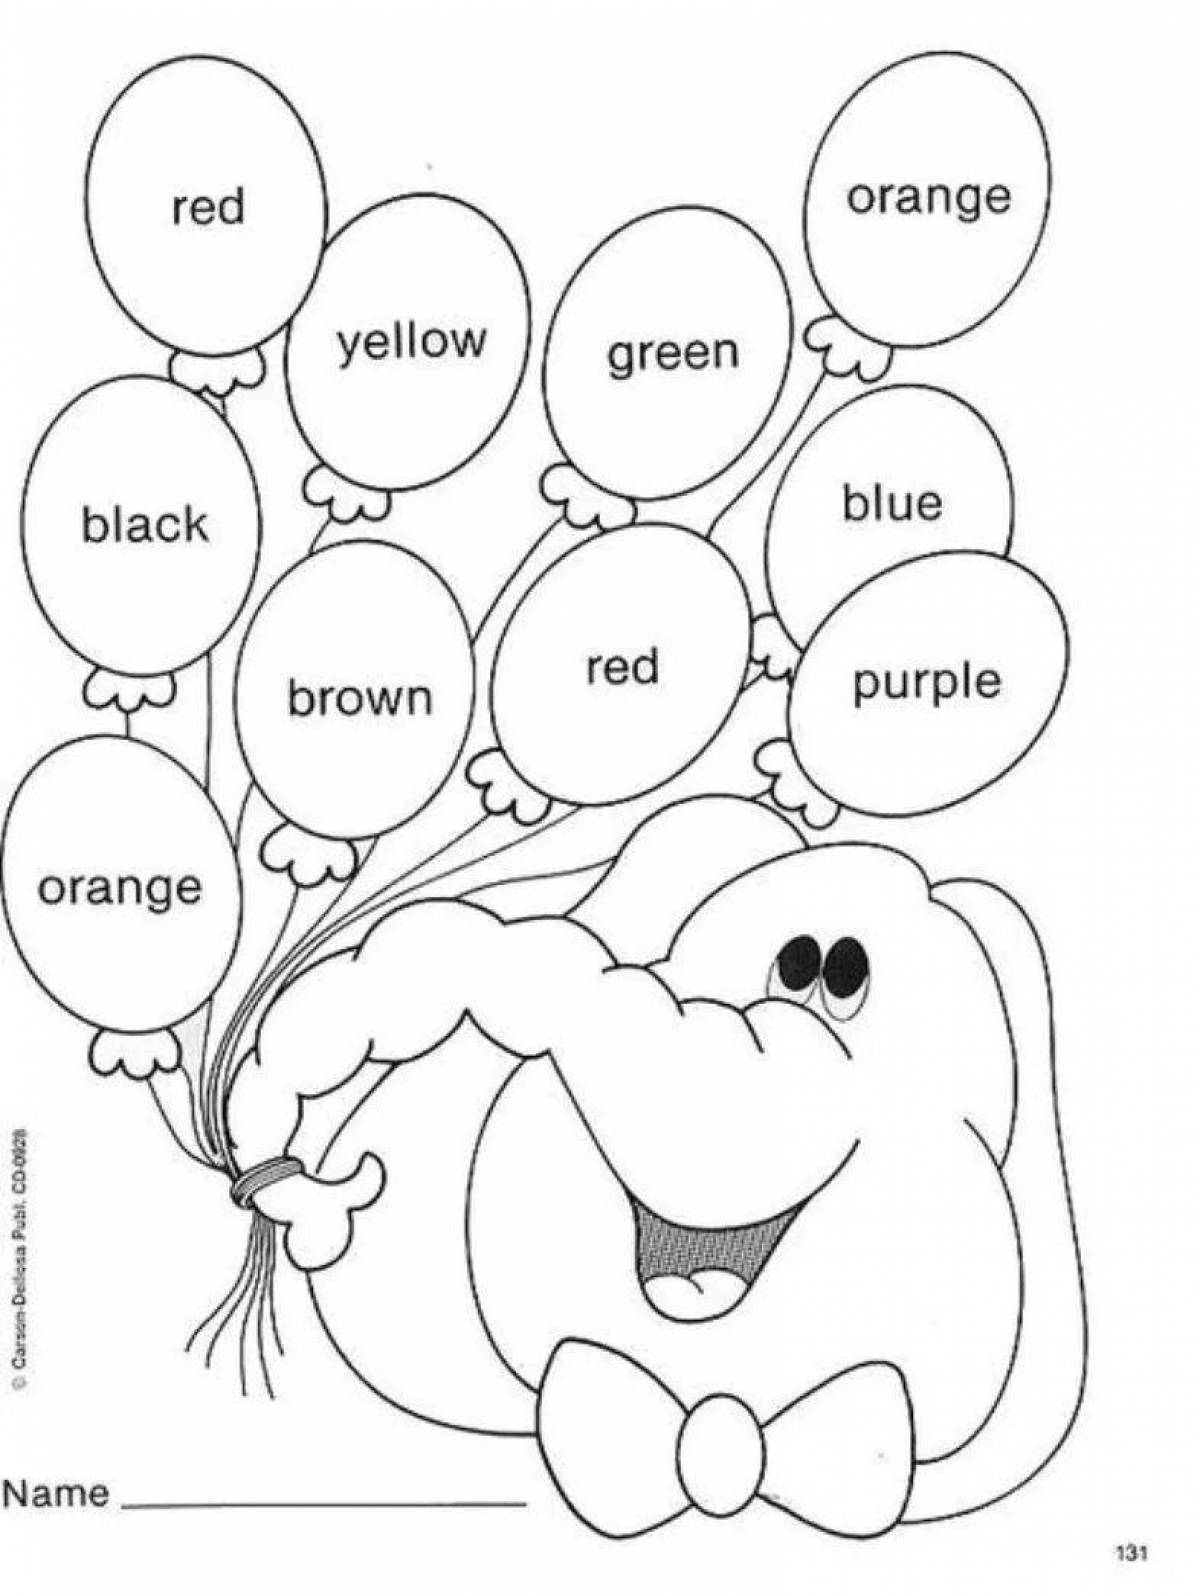 Exciting coloring pages in english for kids